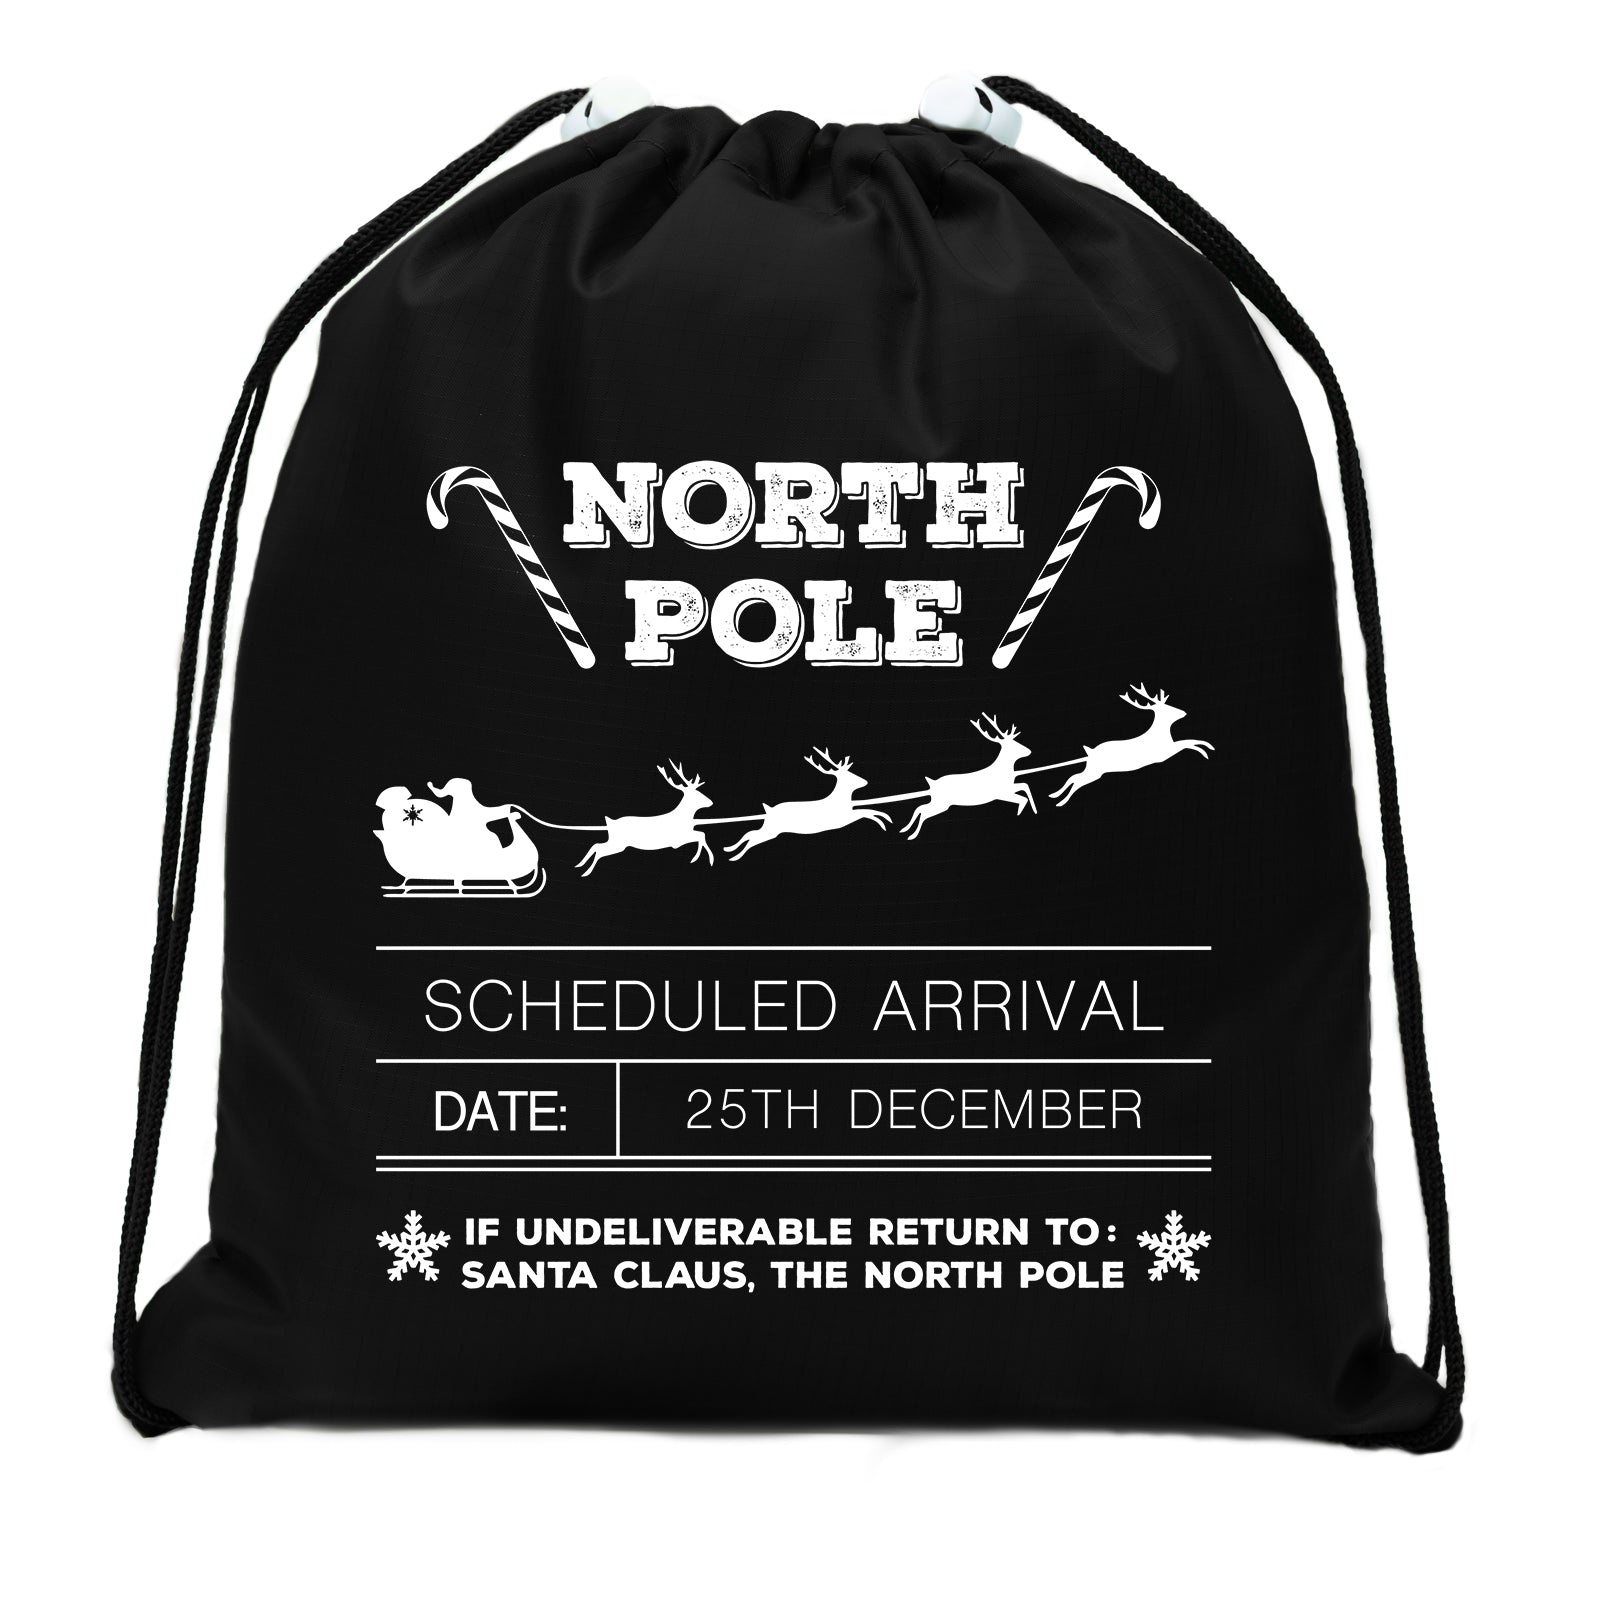 North Pole Scheduled Arrival 25th December Mini Polyester Drawstring Bag - Mato & Hash